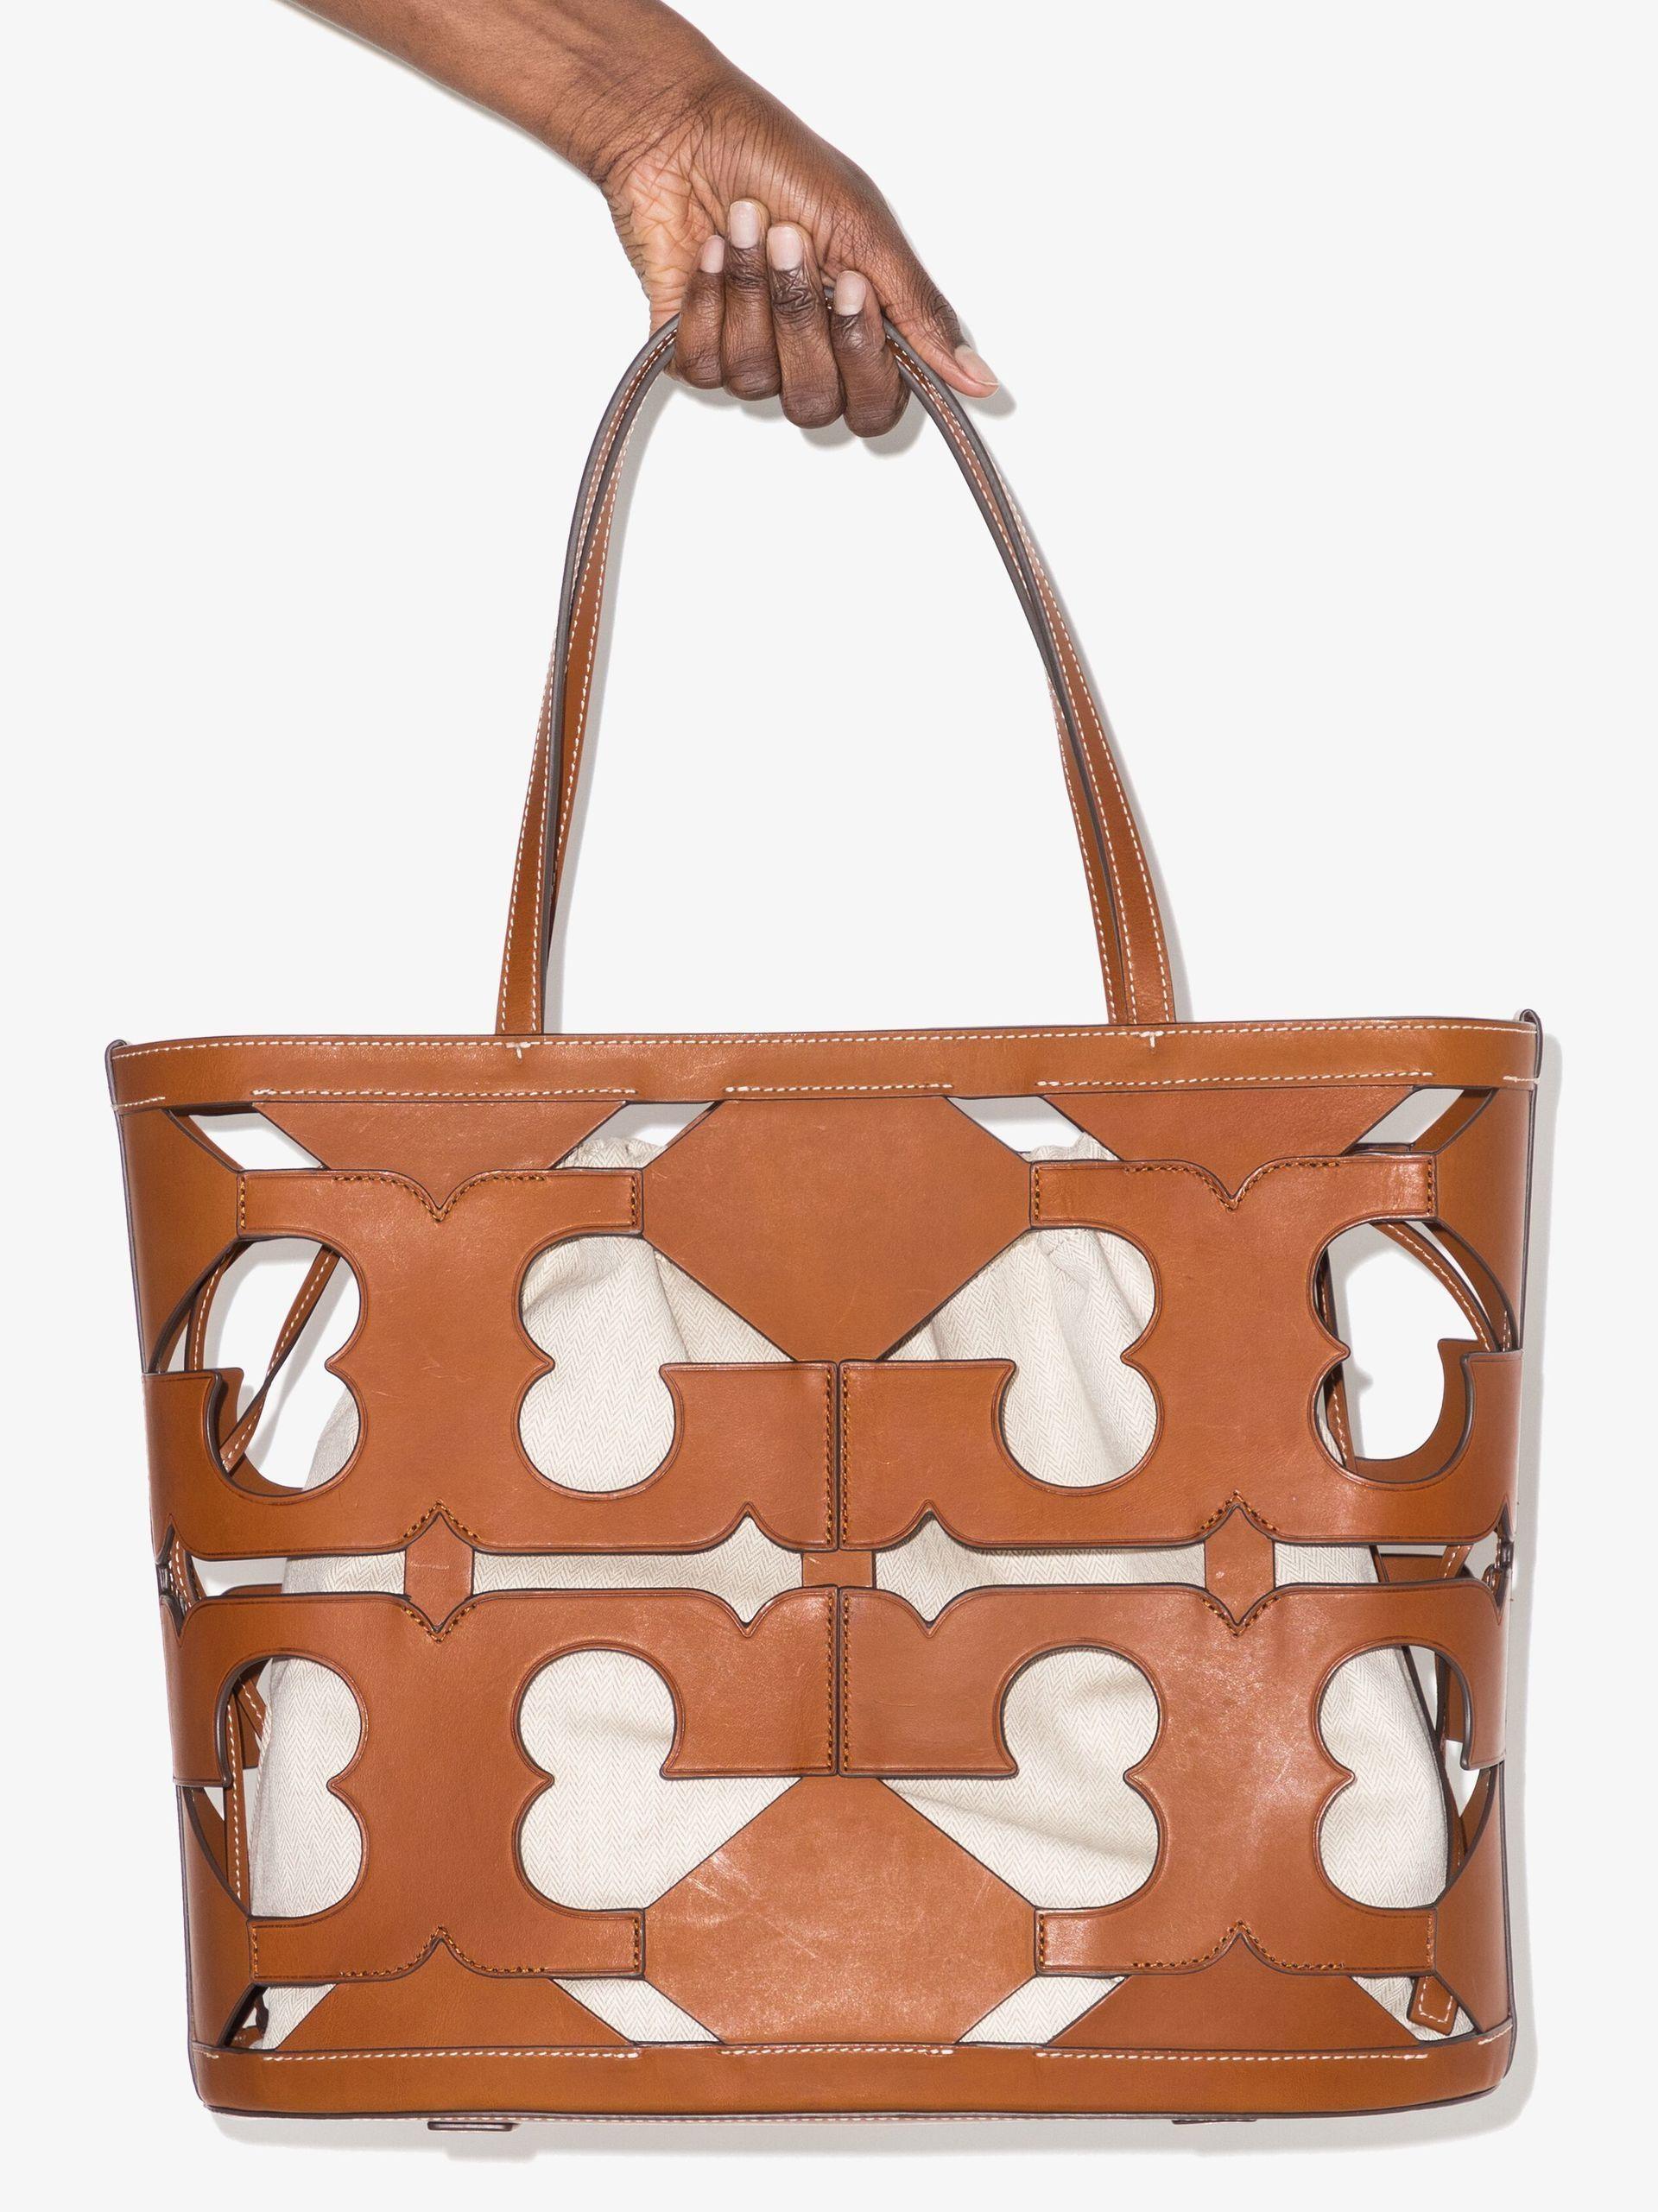 Tory Burch Double T Cutout Logo Leather Tote Bag in Brown | Lyst